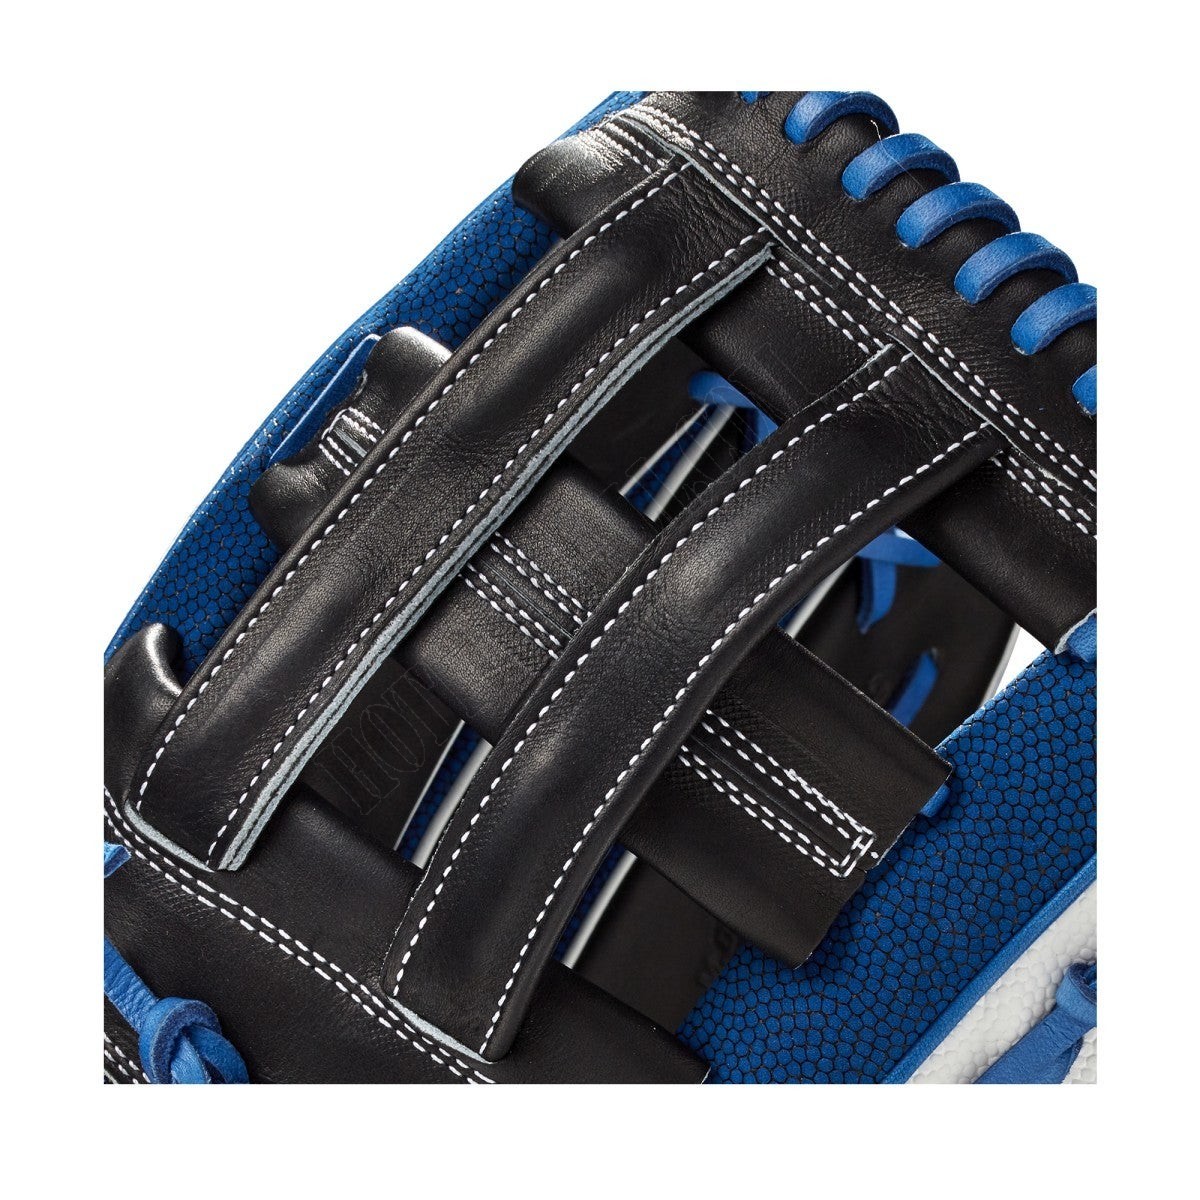 2021 A2K MB50 GM 12.5" Baseball Outfield Glove ● Wilson Promotions - -5